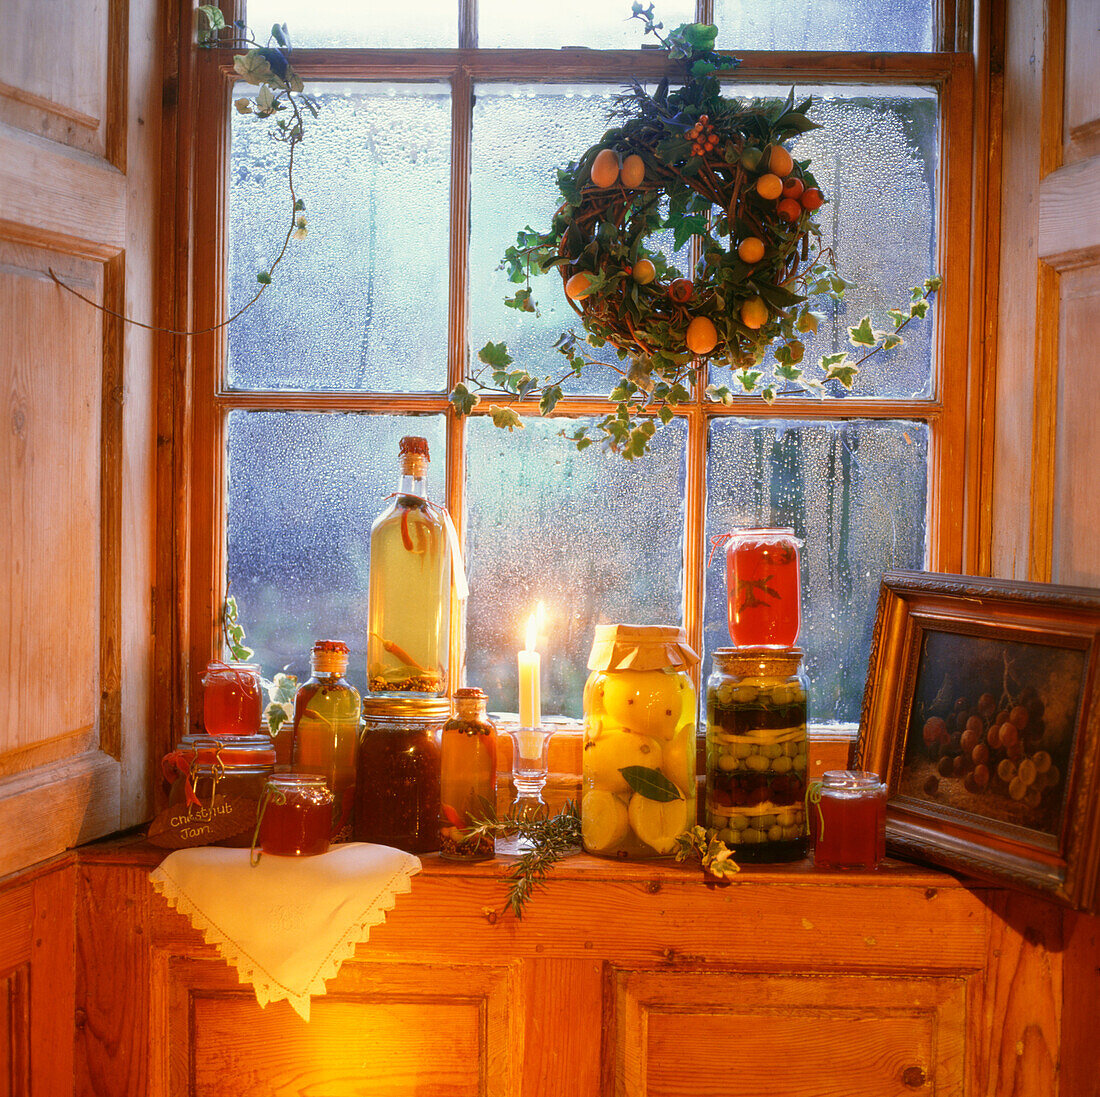 Steamed up window on a winters evening with preserves pickles and Christmas decorations